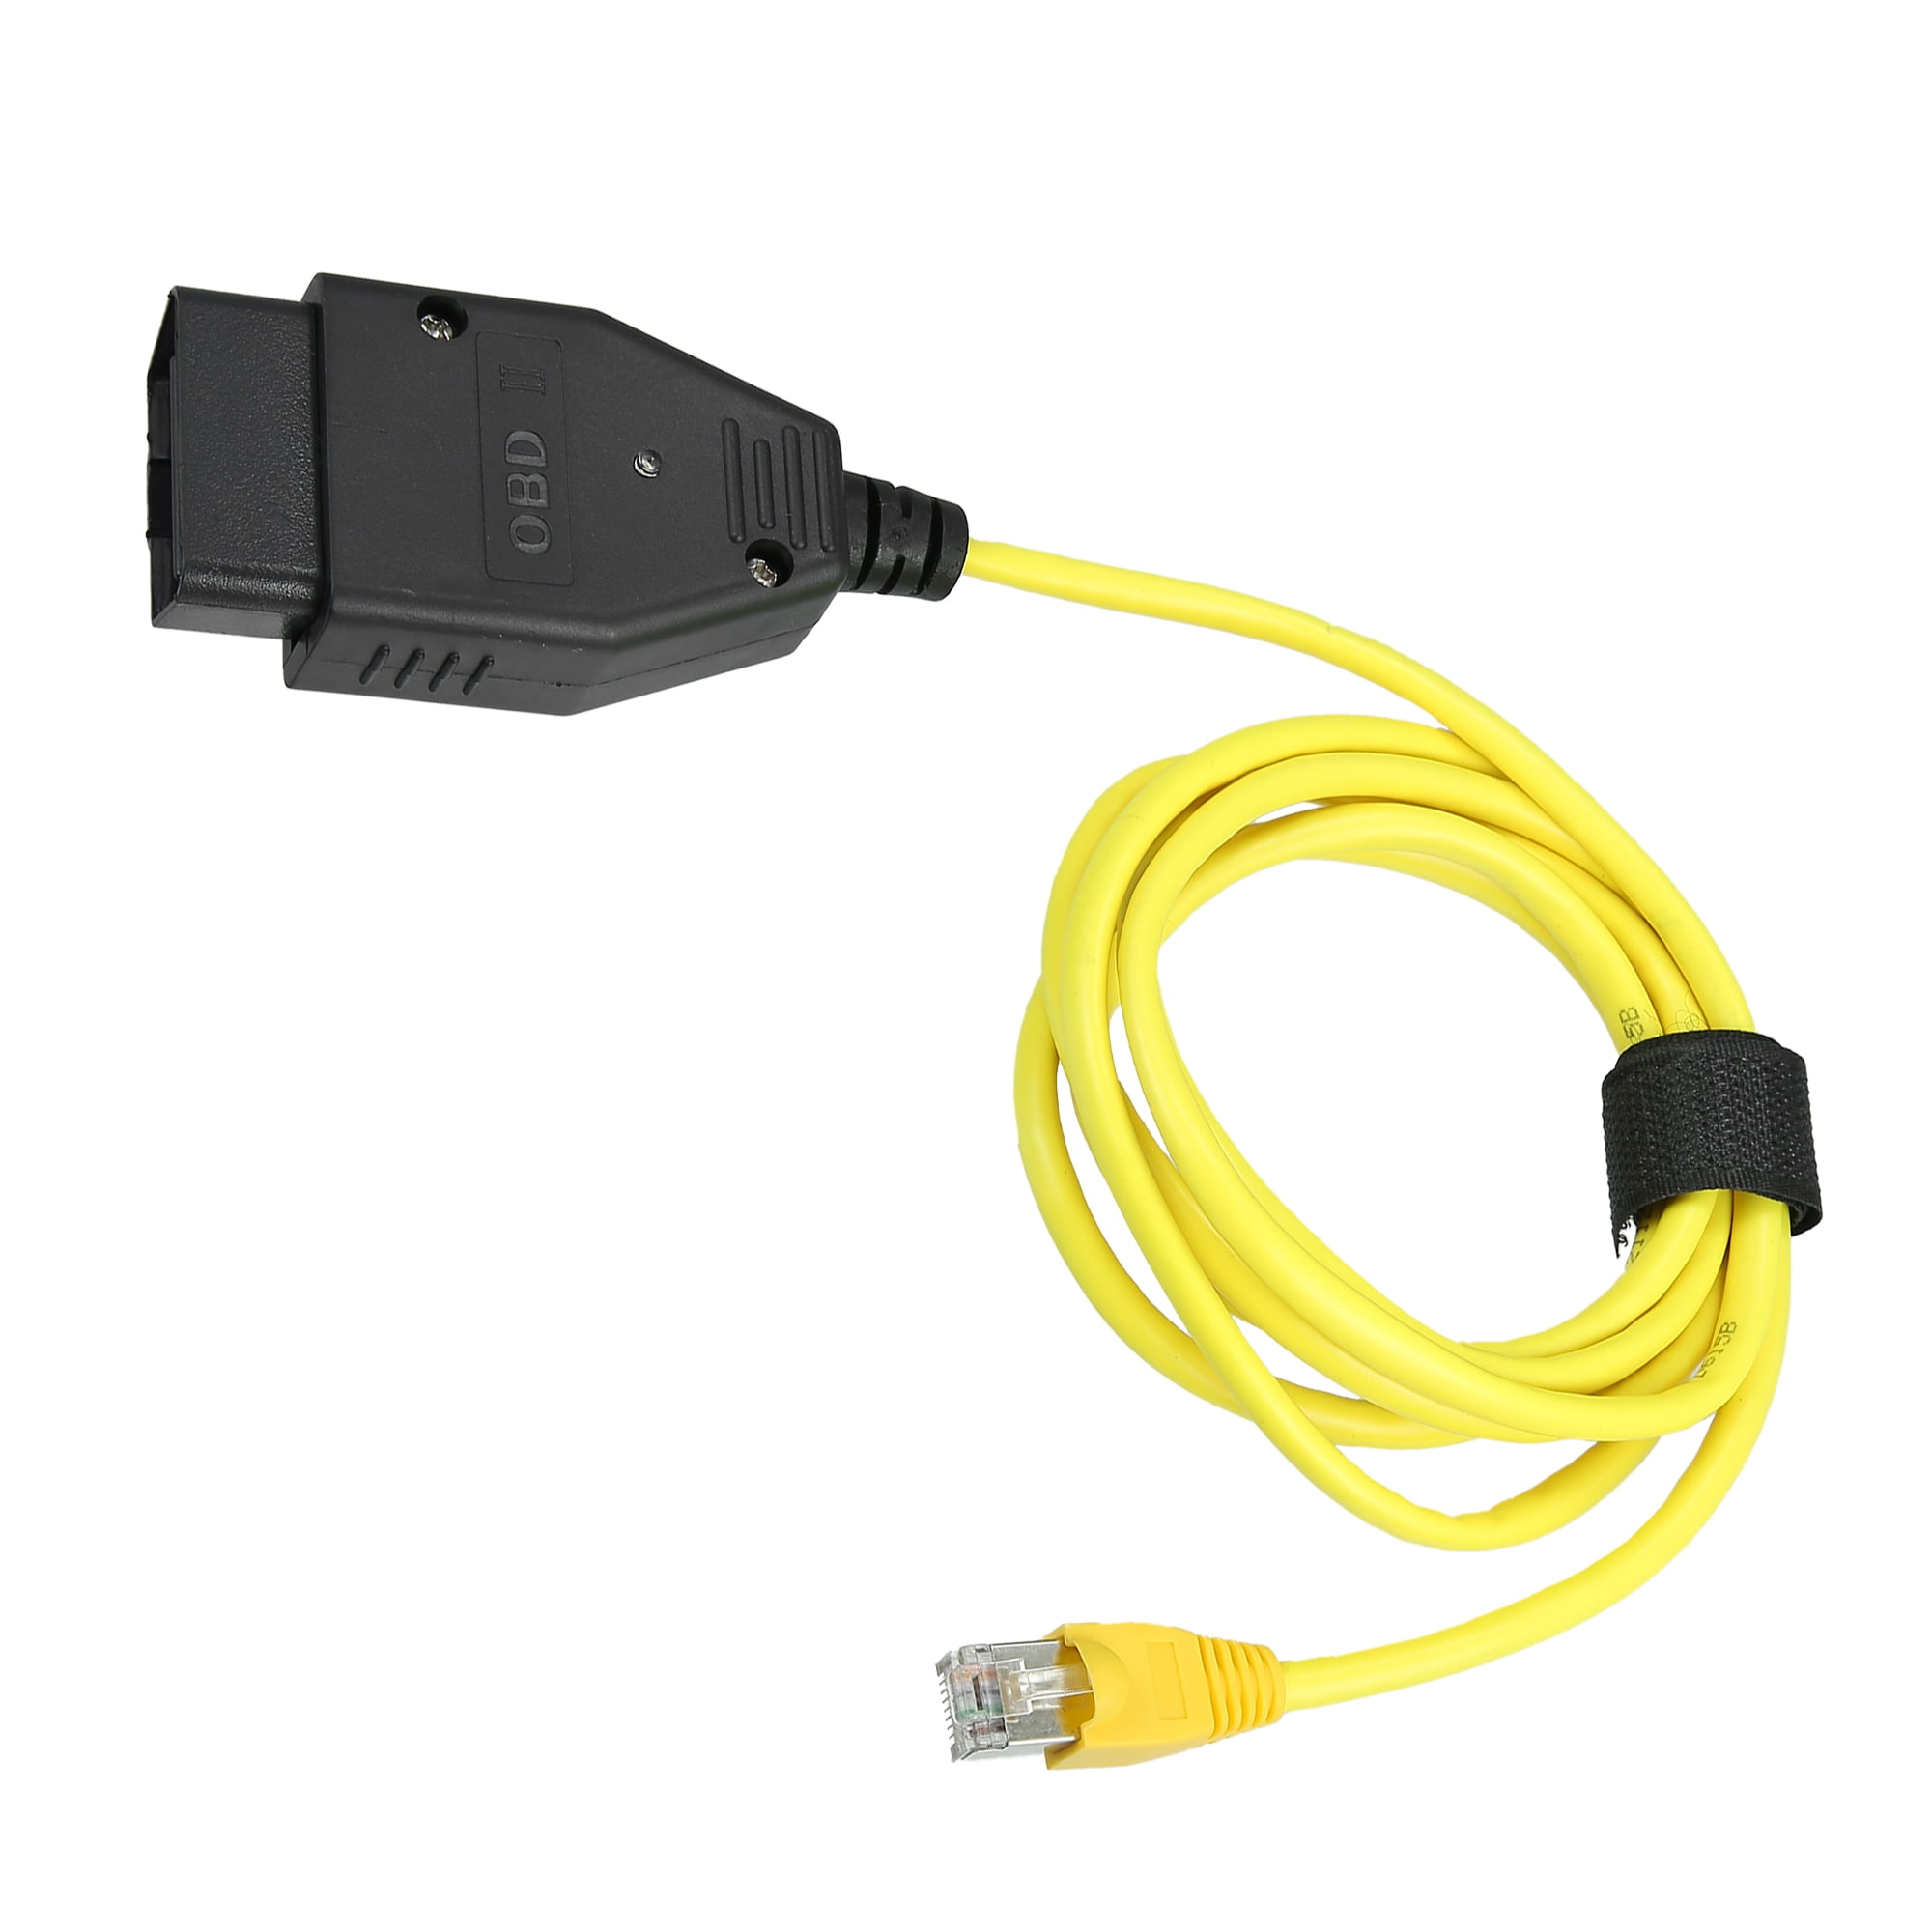 AuraTech Enet obd2 Cable ethernet Connector F seires Coding Cable